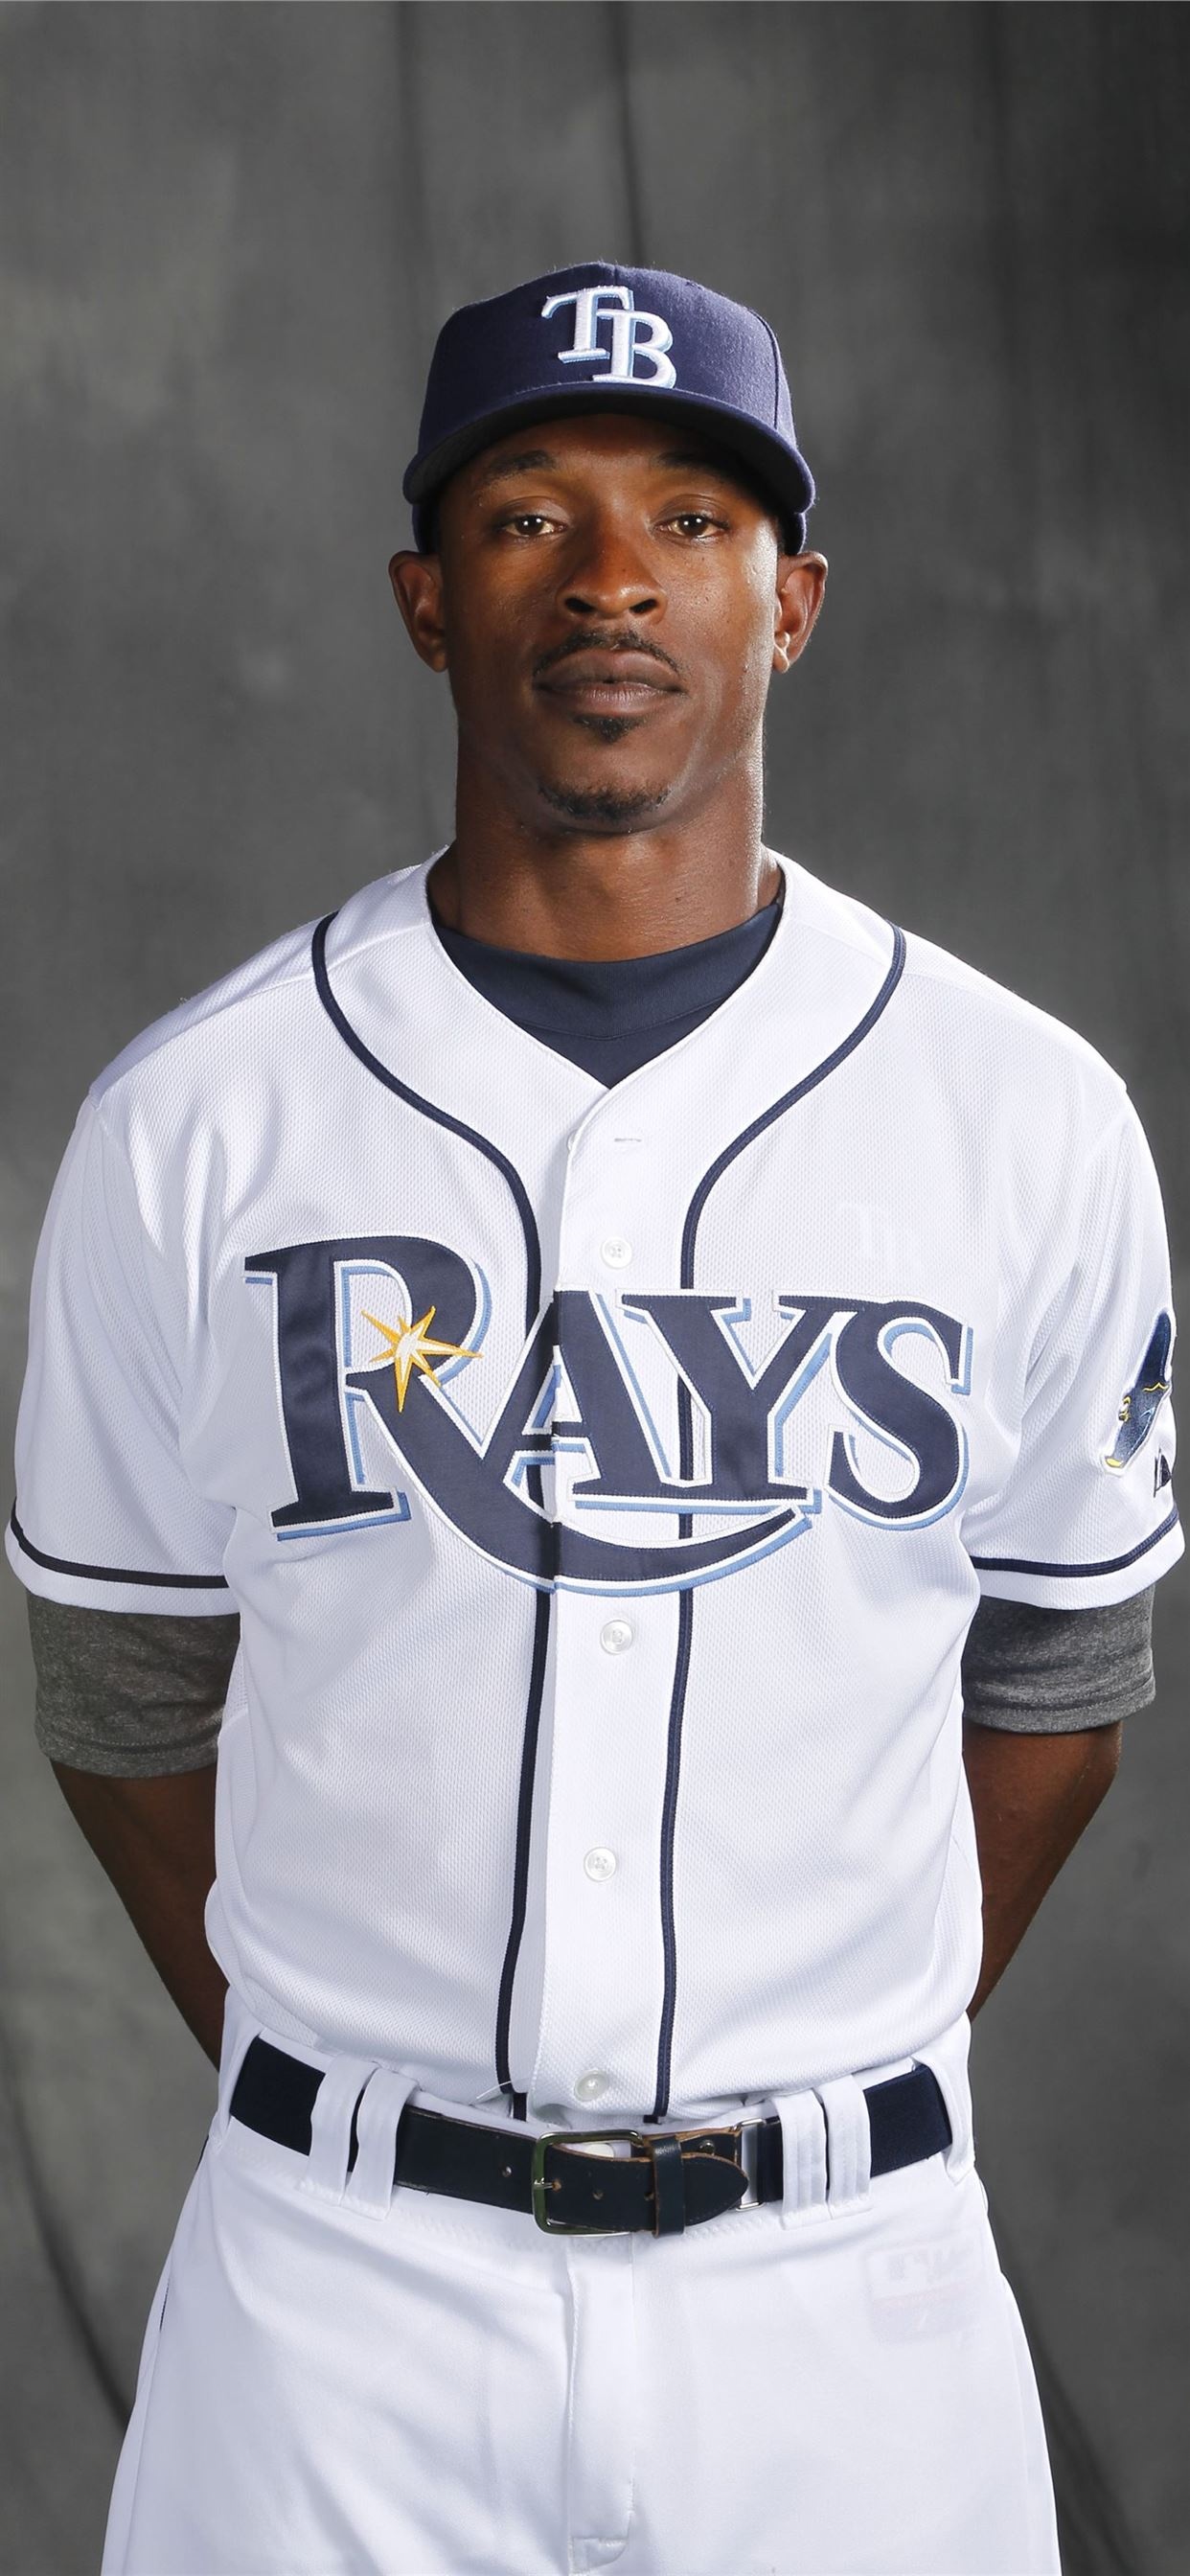 Tampa Bay Rays, iPhone wallpapers, Free download, 1250x2690 HD Phone